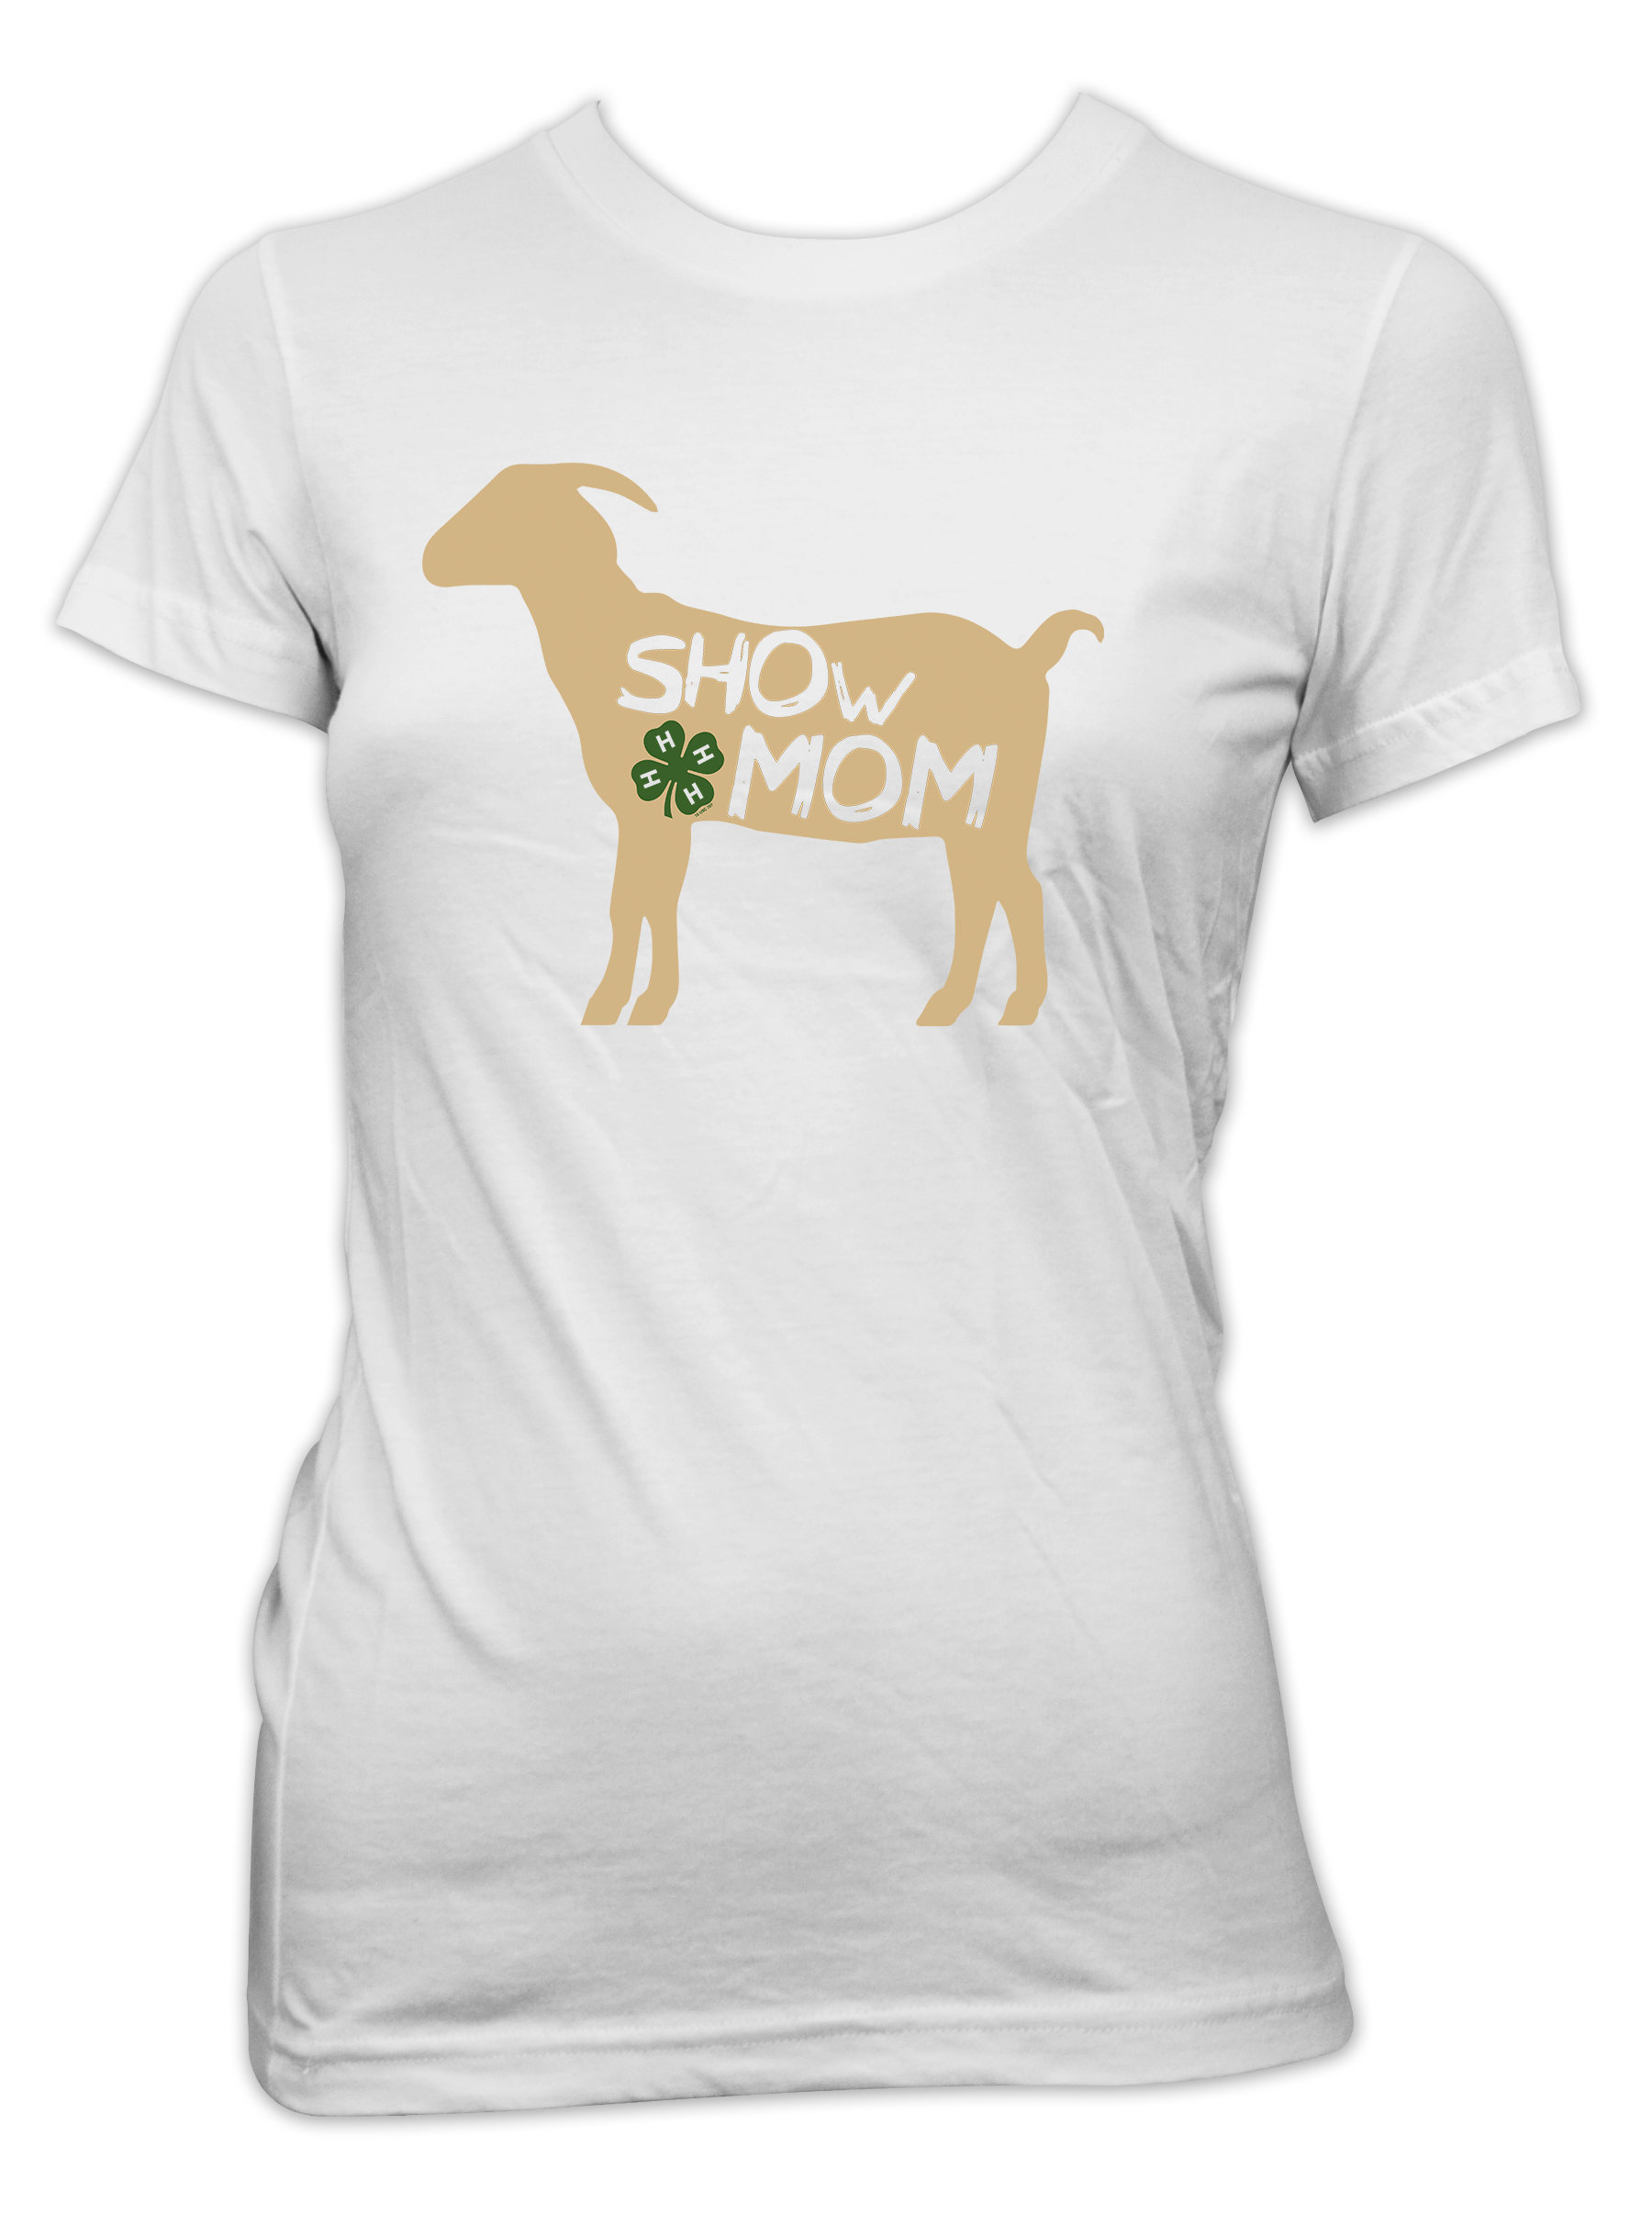 4-H Mom Graphic Tee - Goat Show Mom SP7762 - 4-H Store